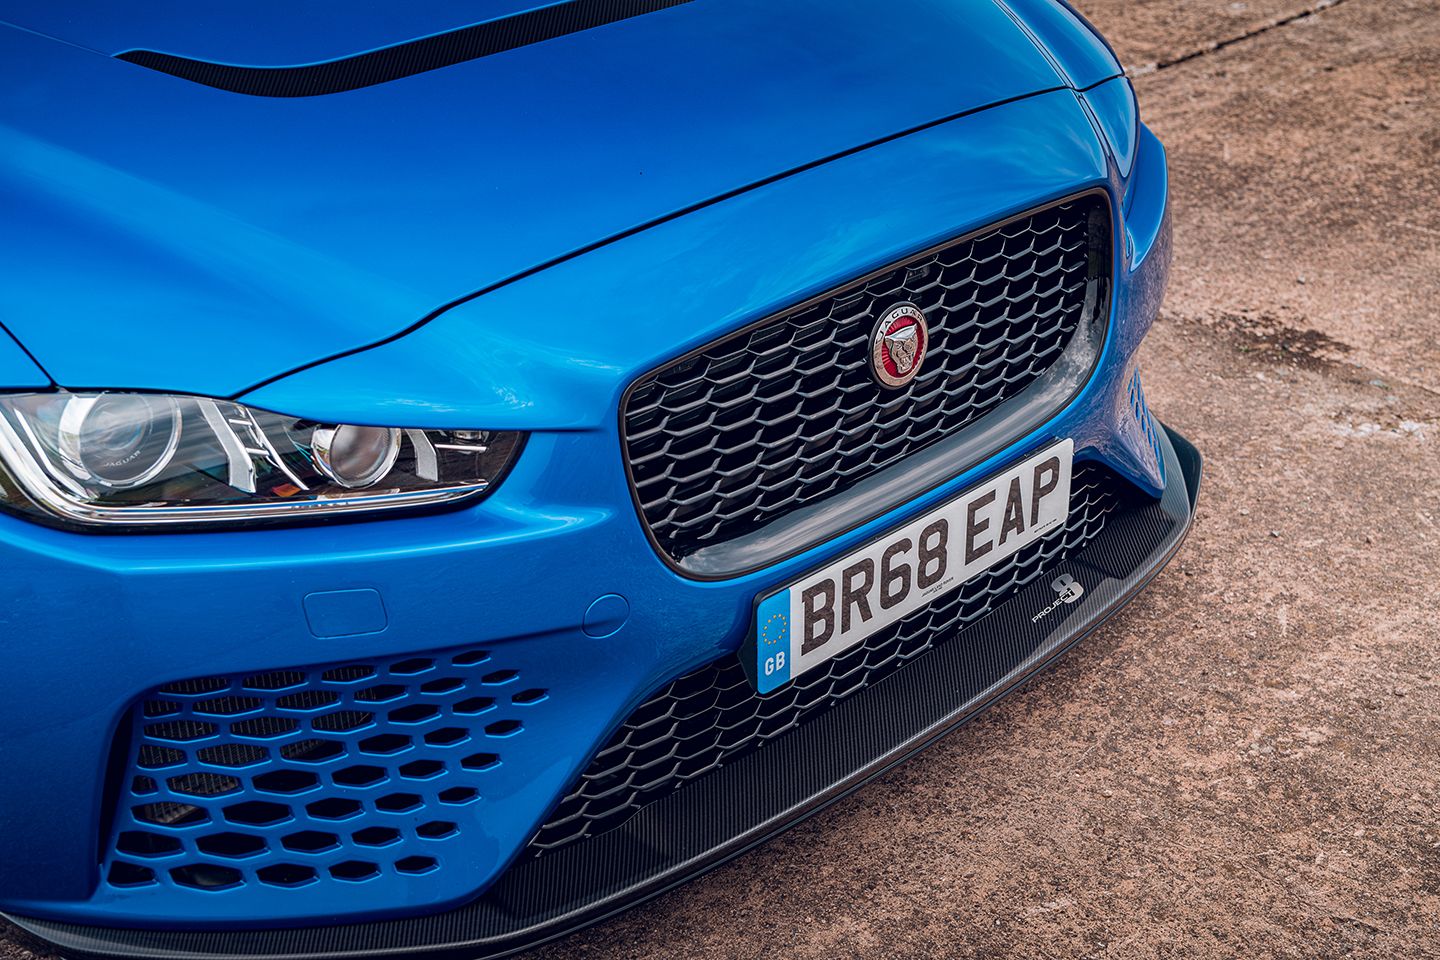 Jaguar XE SV Project 8  PH Used Buying Guide - PistonHeads UK